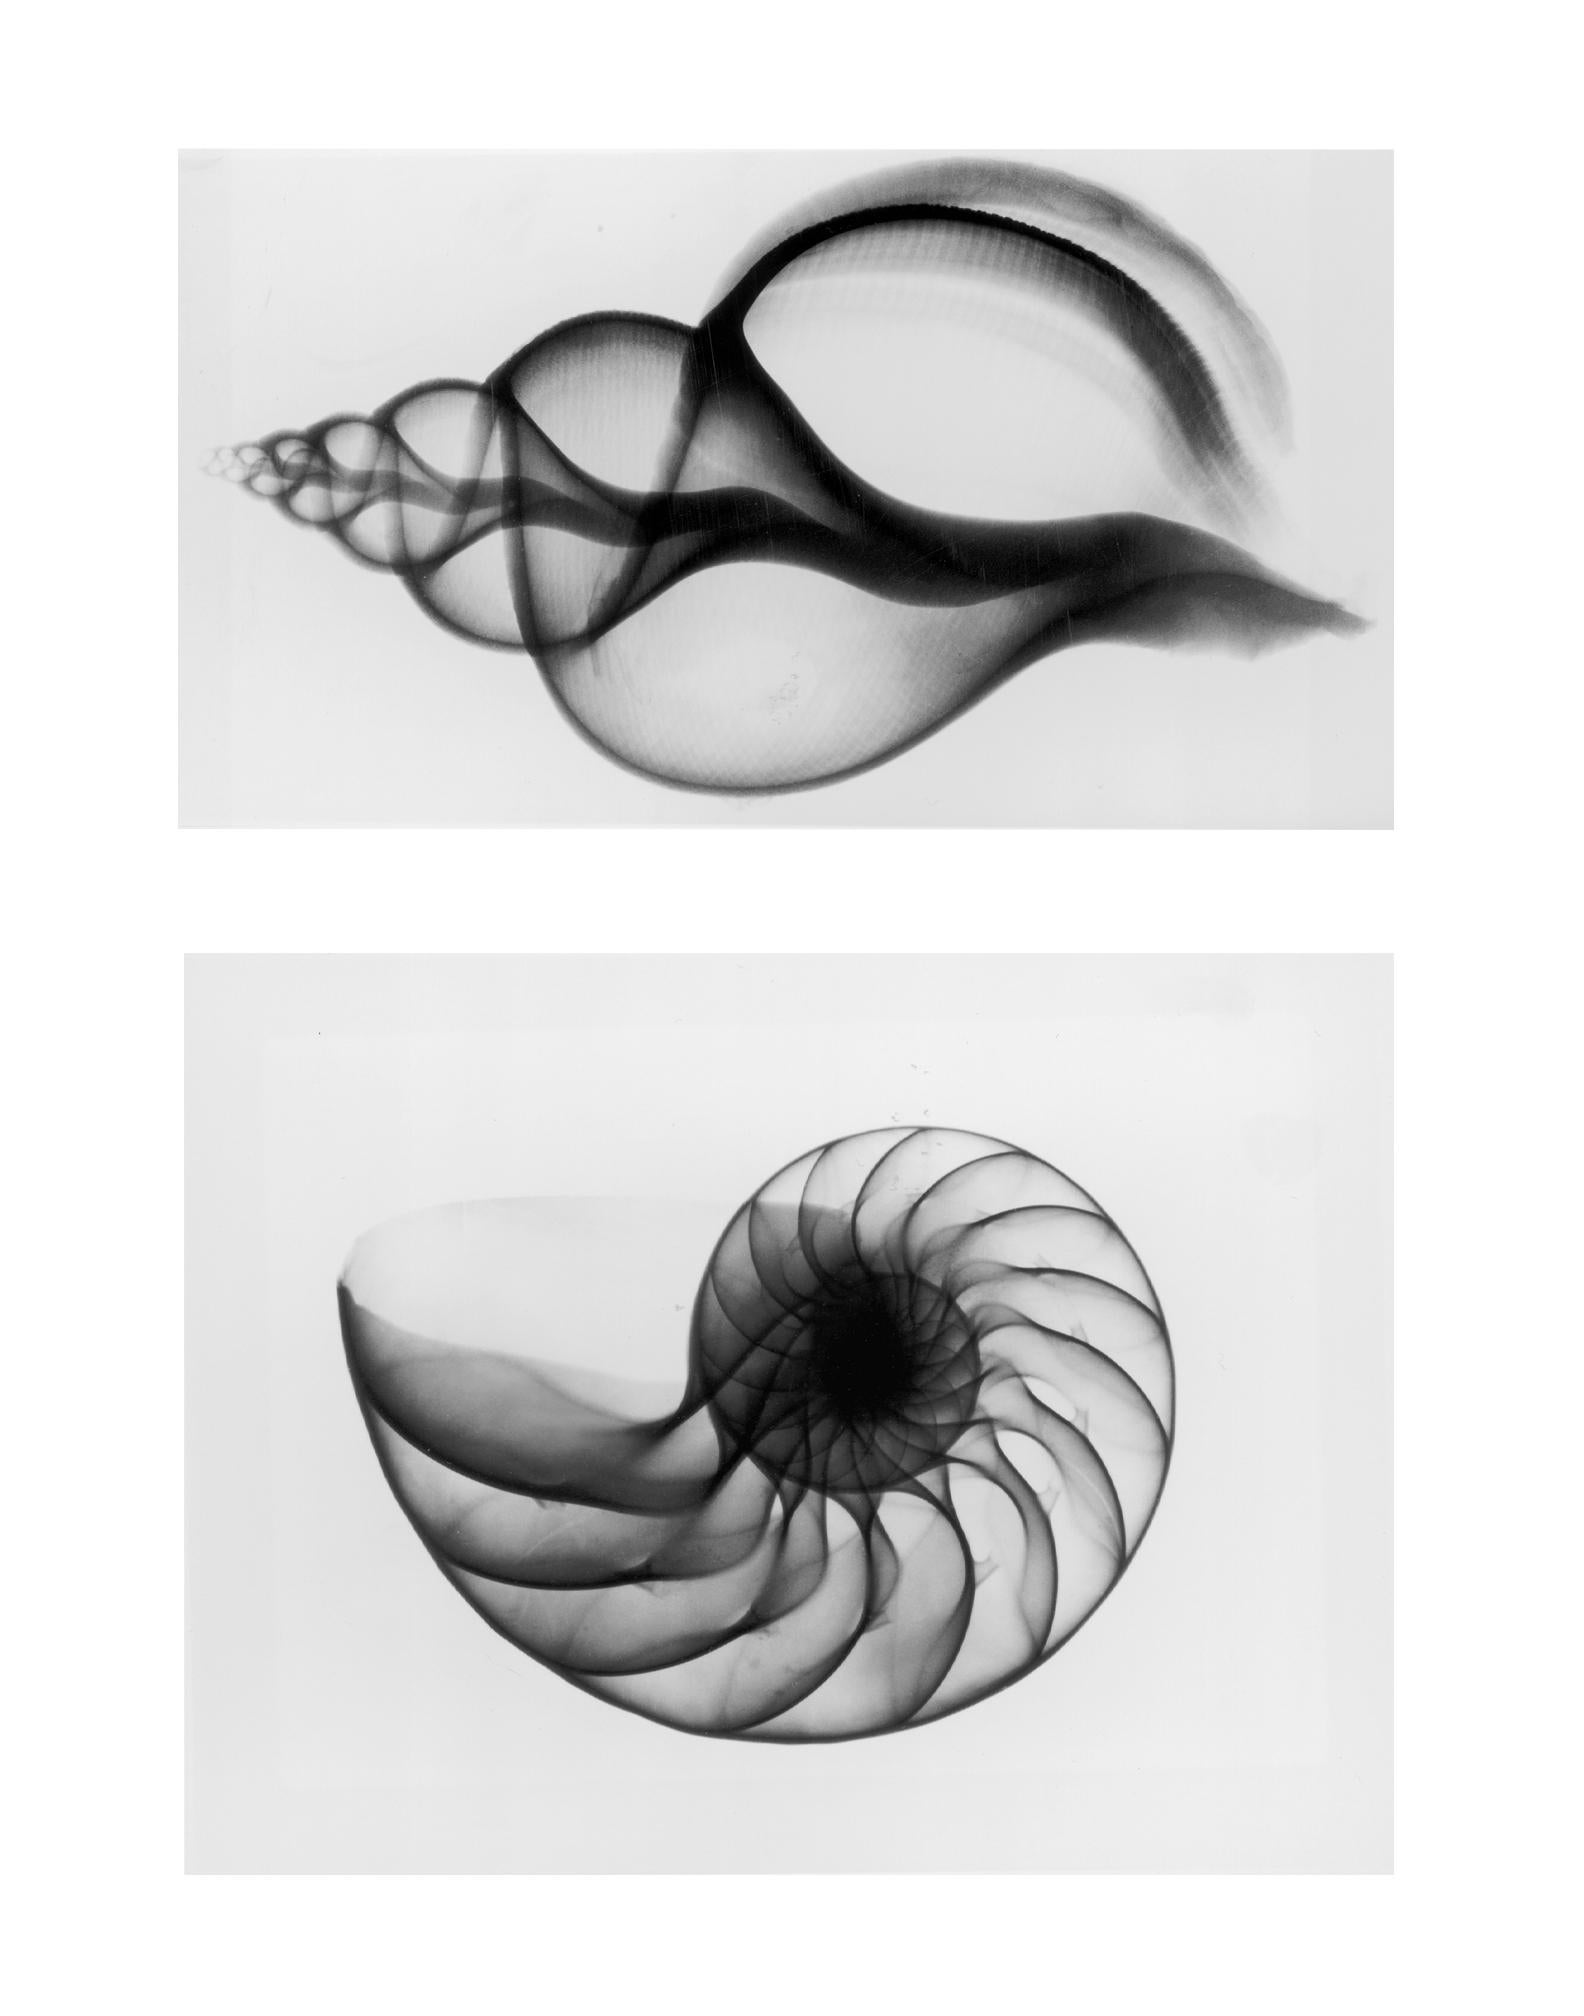 Edward Charles Le Grice Black and White Photograph - X-Ray Seashell Pair, Circa 1910, Silver Gelatin prints, Black & White, Abstract